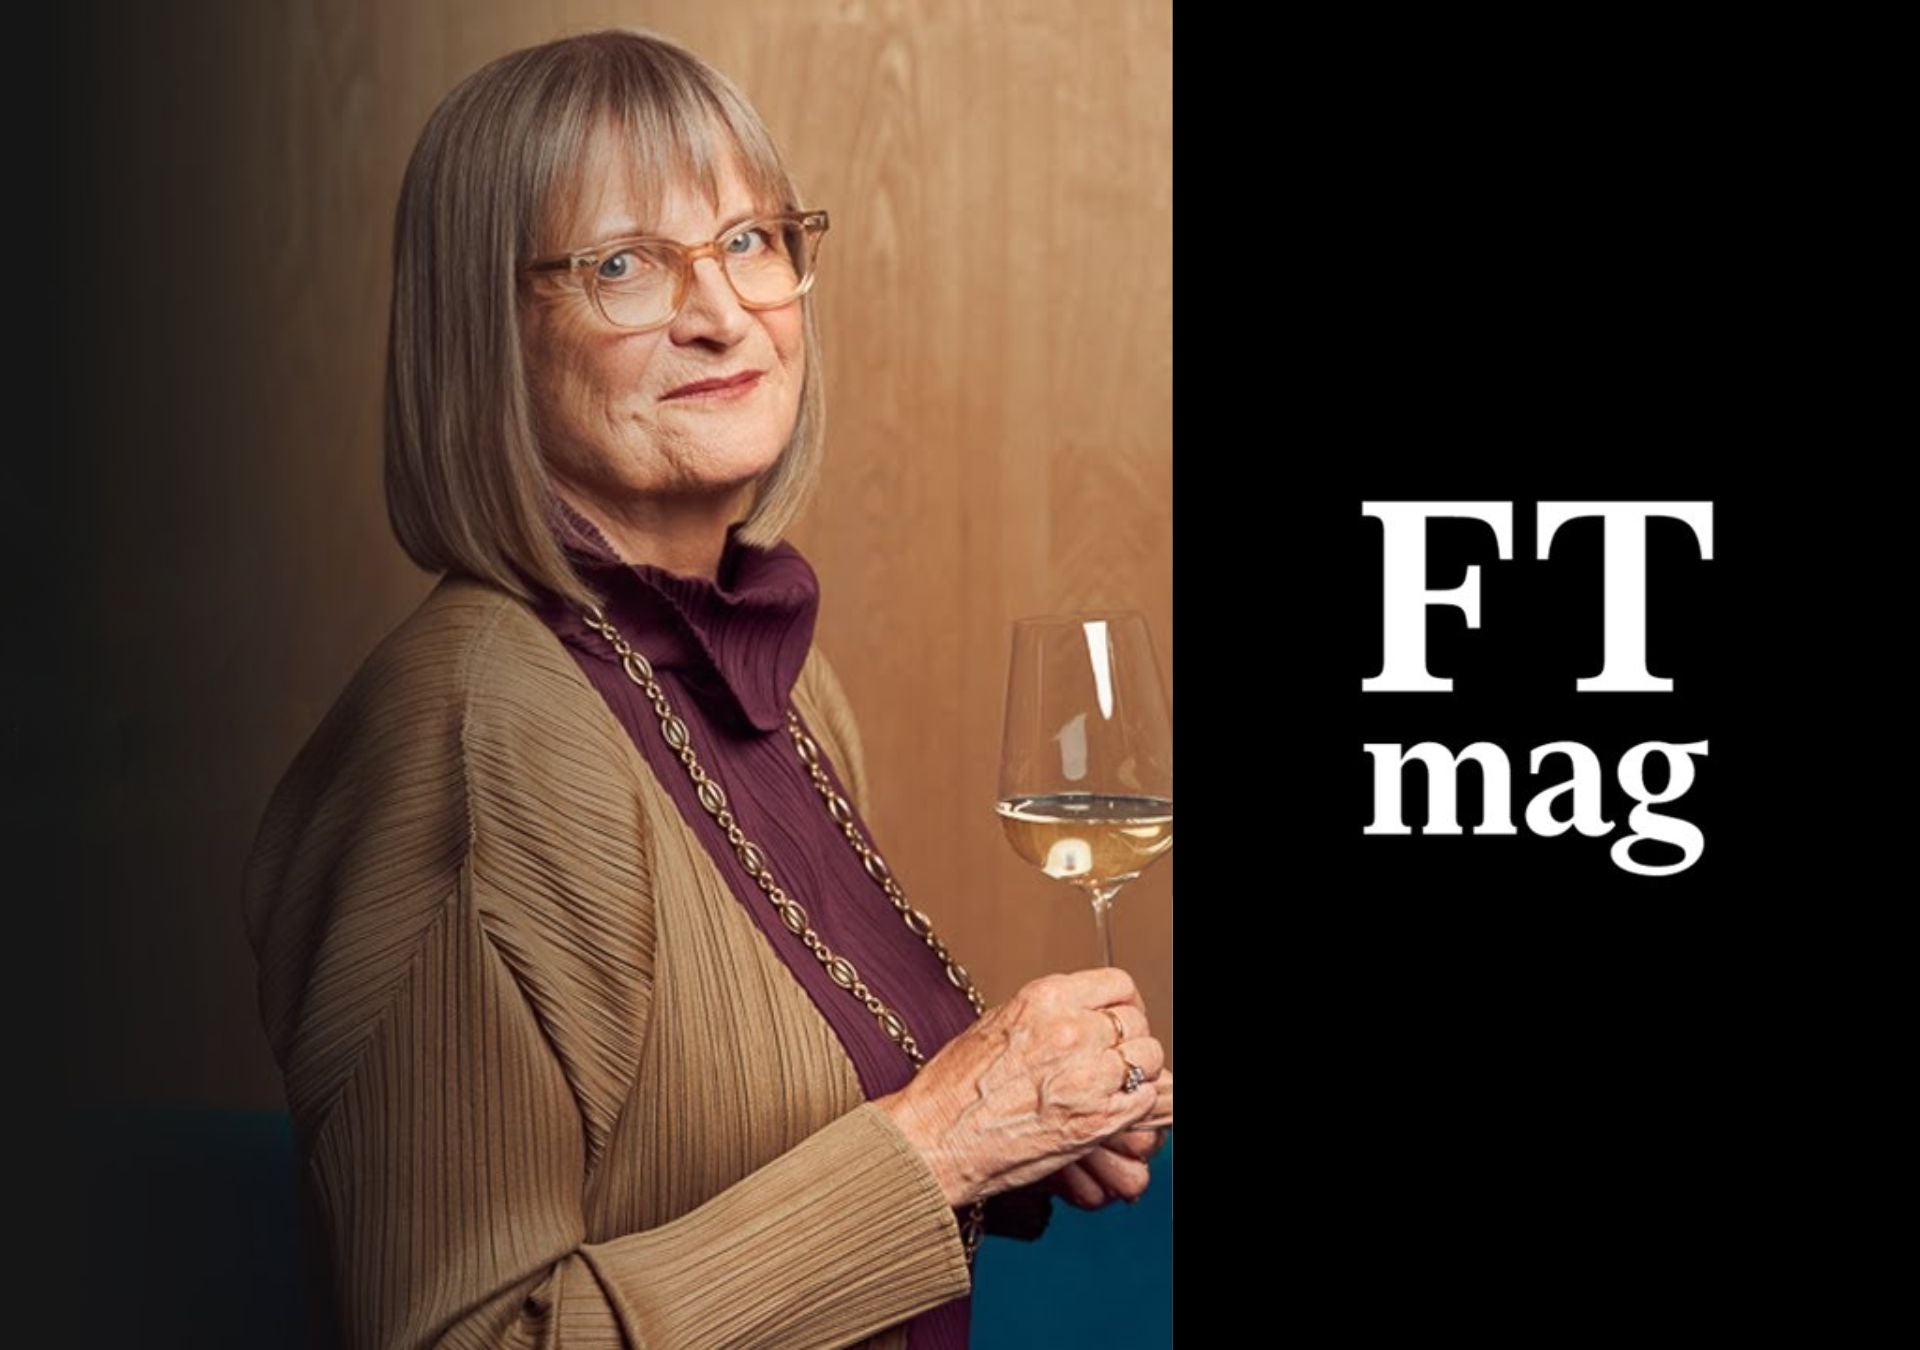 FT Weekend Magazine - Iberian bargains worth ageing - Jancis recommends...